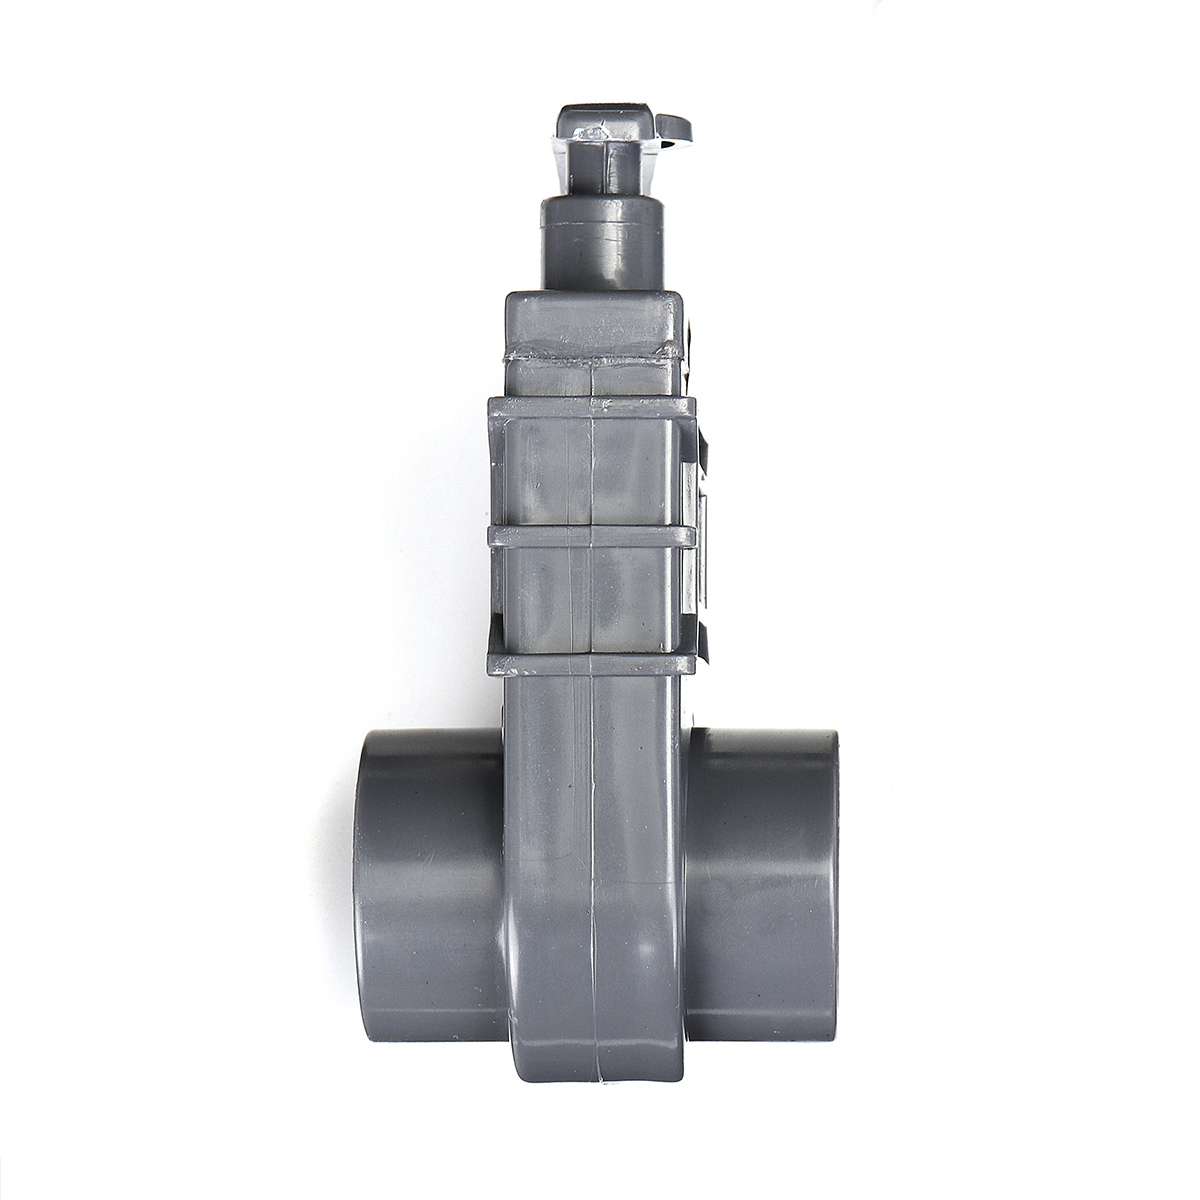 DN32-Upvc-EPDM-Stainless-Steel-Sewage-Gate-Valve-Industry-UPVC-Pull-Plate-Mixing-Valves-035Mpa-1351256